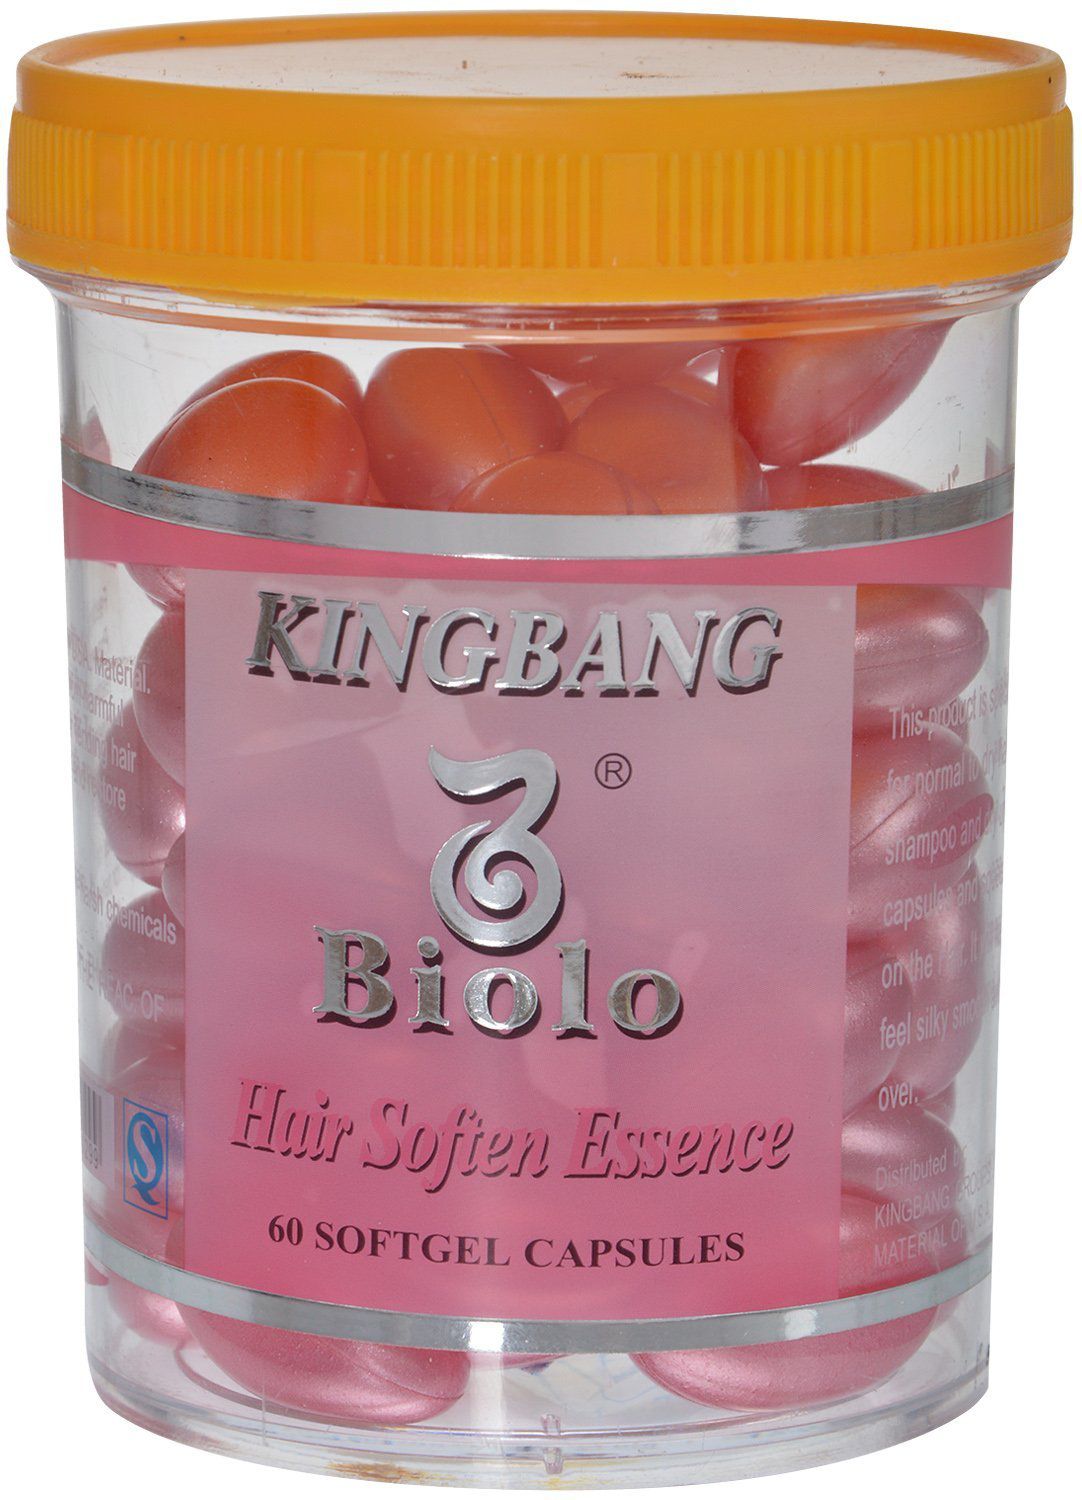 KINGBANG VITAMIN E ANIMATE HAIR SOFTEN ESSENCE HAIR SOFTGEL CAPSULE 60 x  : Buy KINGBANG VITAMIN E ANIMATE HAIR SOFTEN ESSENCE HAIR SOFTGEL  CAPSULE 60 x  at Best Prices in India - Snapdeal